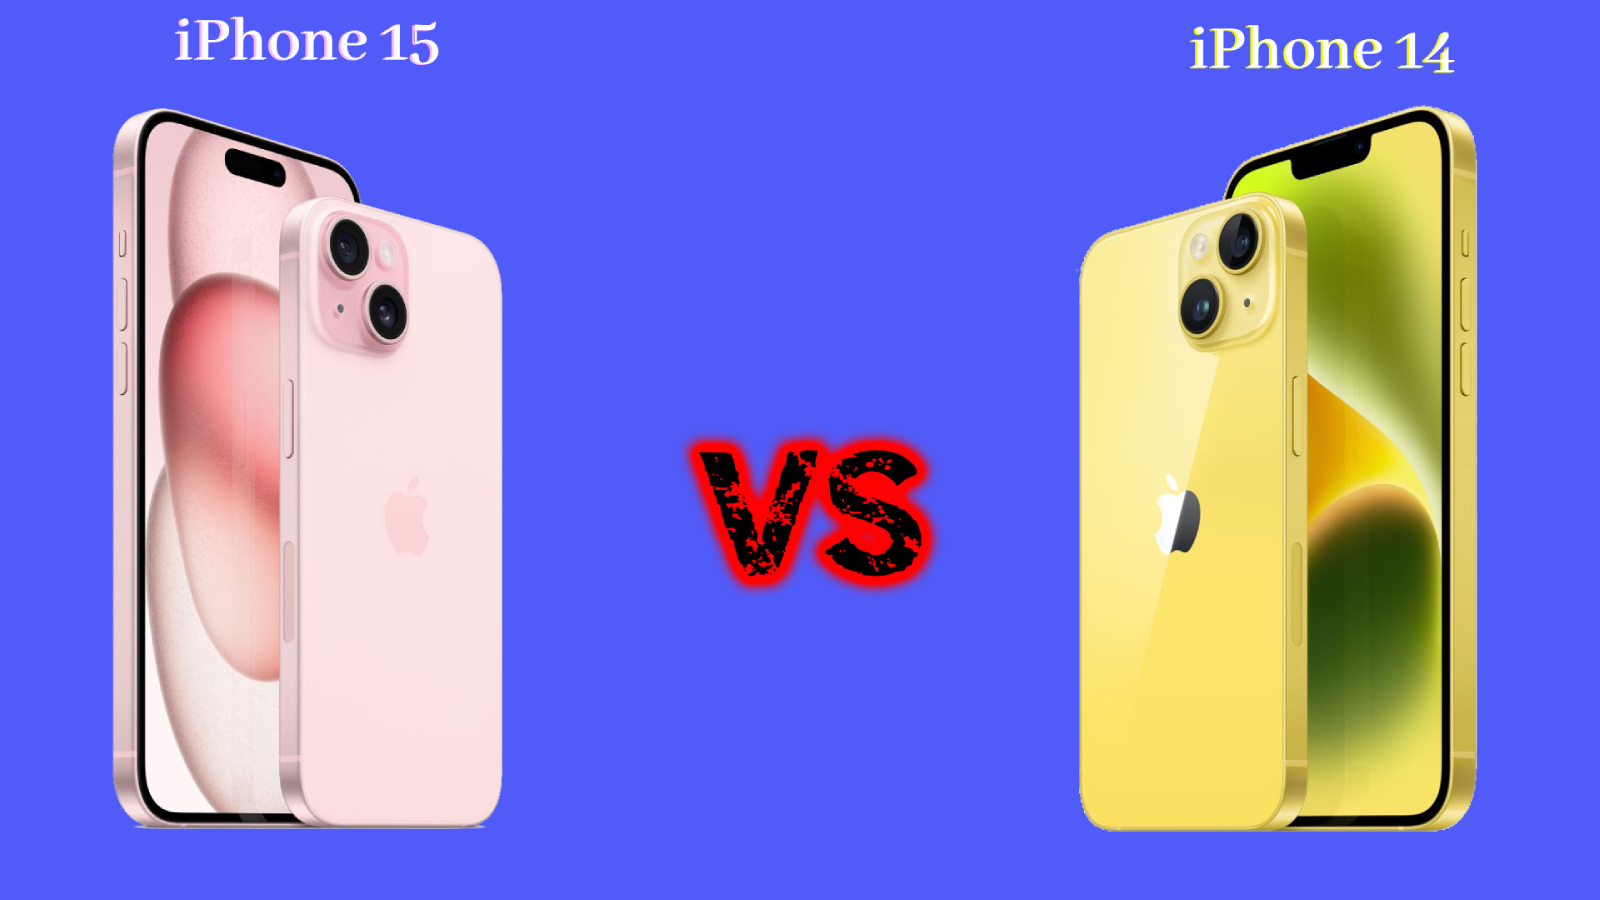 iPhone 15 vs iPhone 14 comparison: Which iPhone to buy?